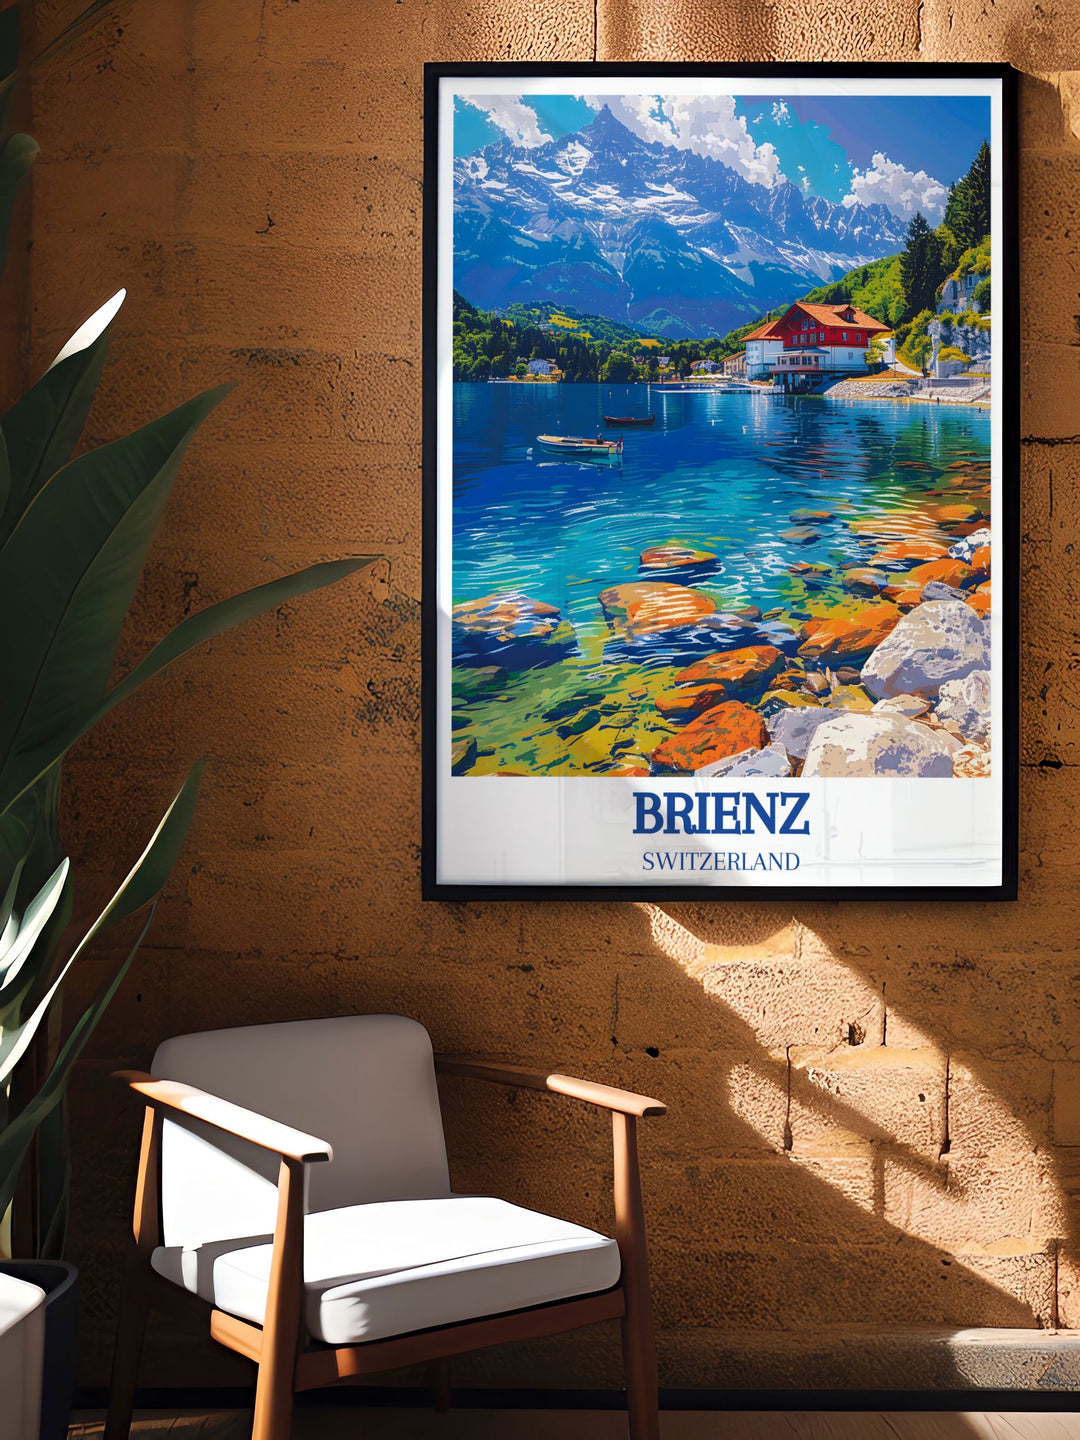 Retro travel poster of Lake Brienz, Brienzer Rothorn featuring iconic Swiss landscapes. Lauterbrunnen print perfect for home decor or gifting. Stunning addition to any wall art collection.